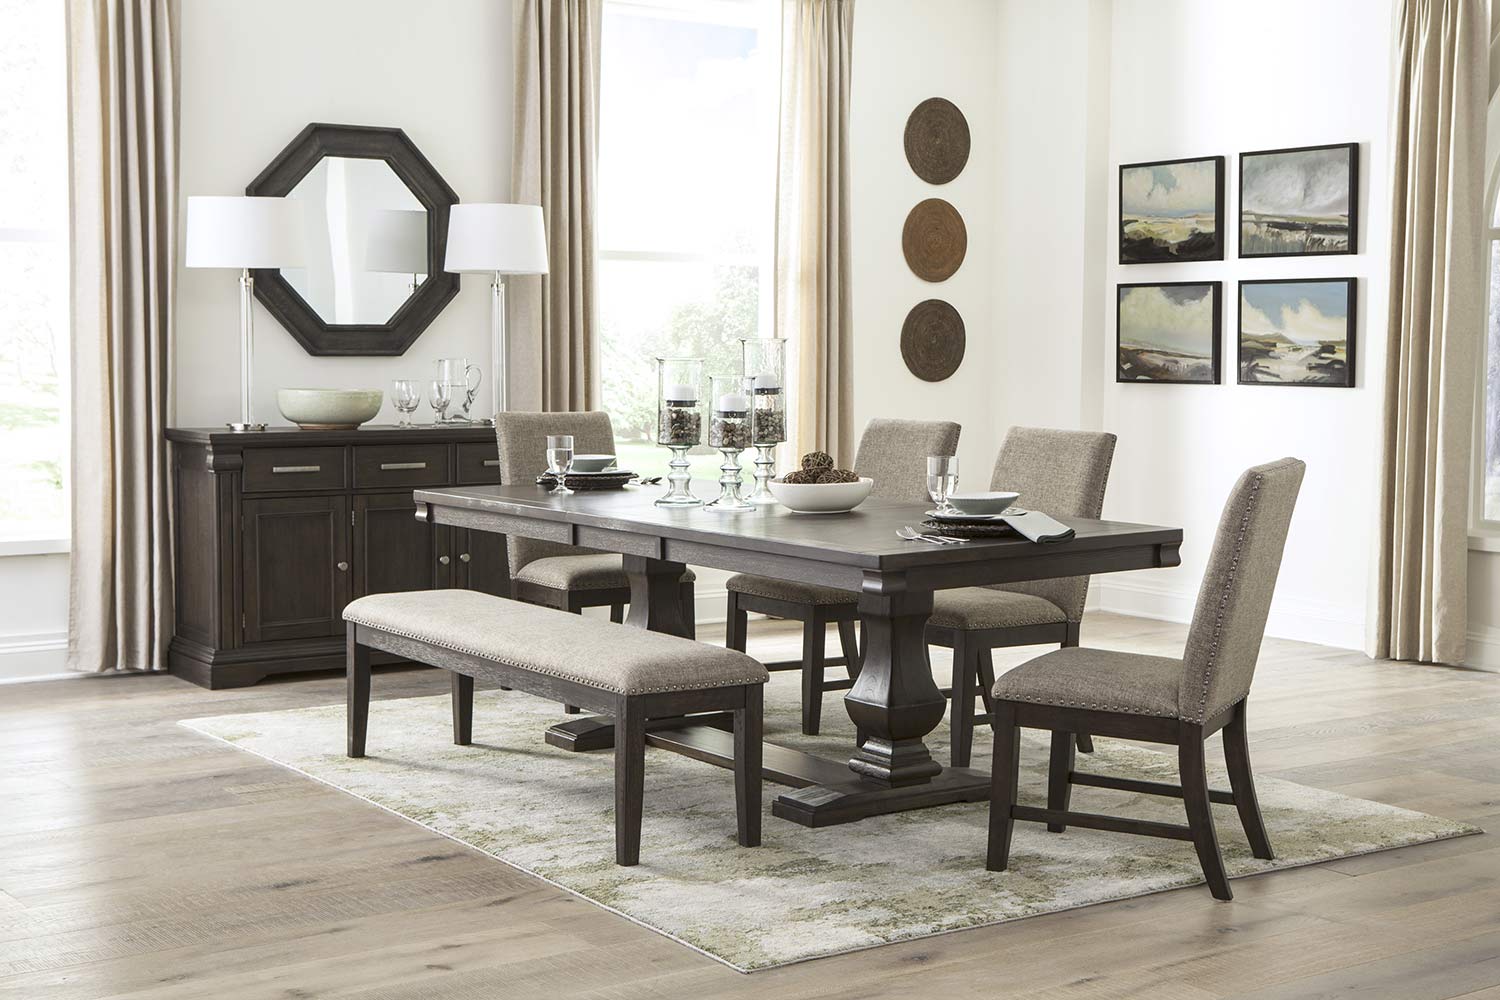 Homelegance Southlake Dining Set - Wire-brushed Rustic Brown